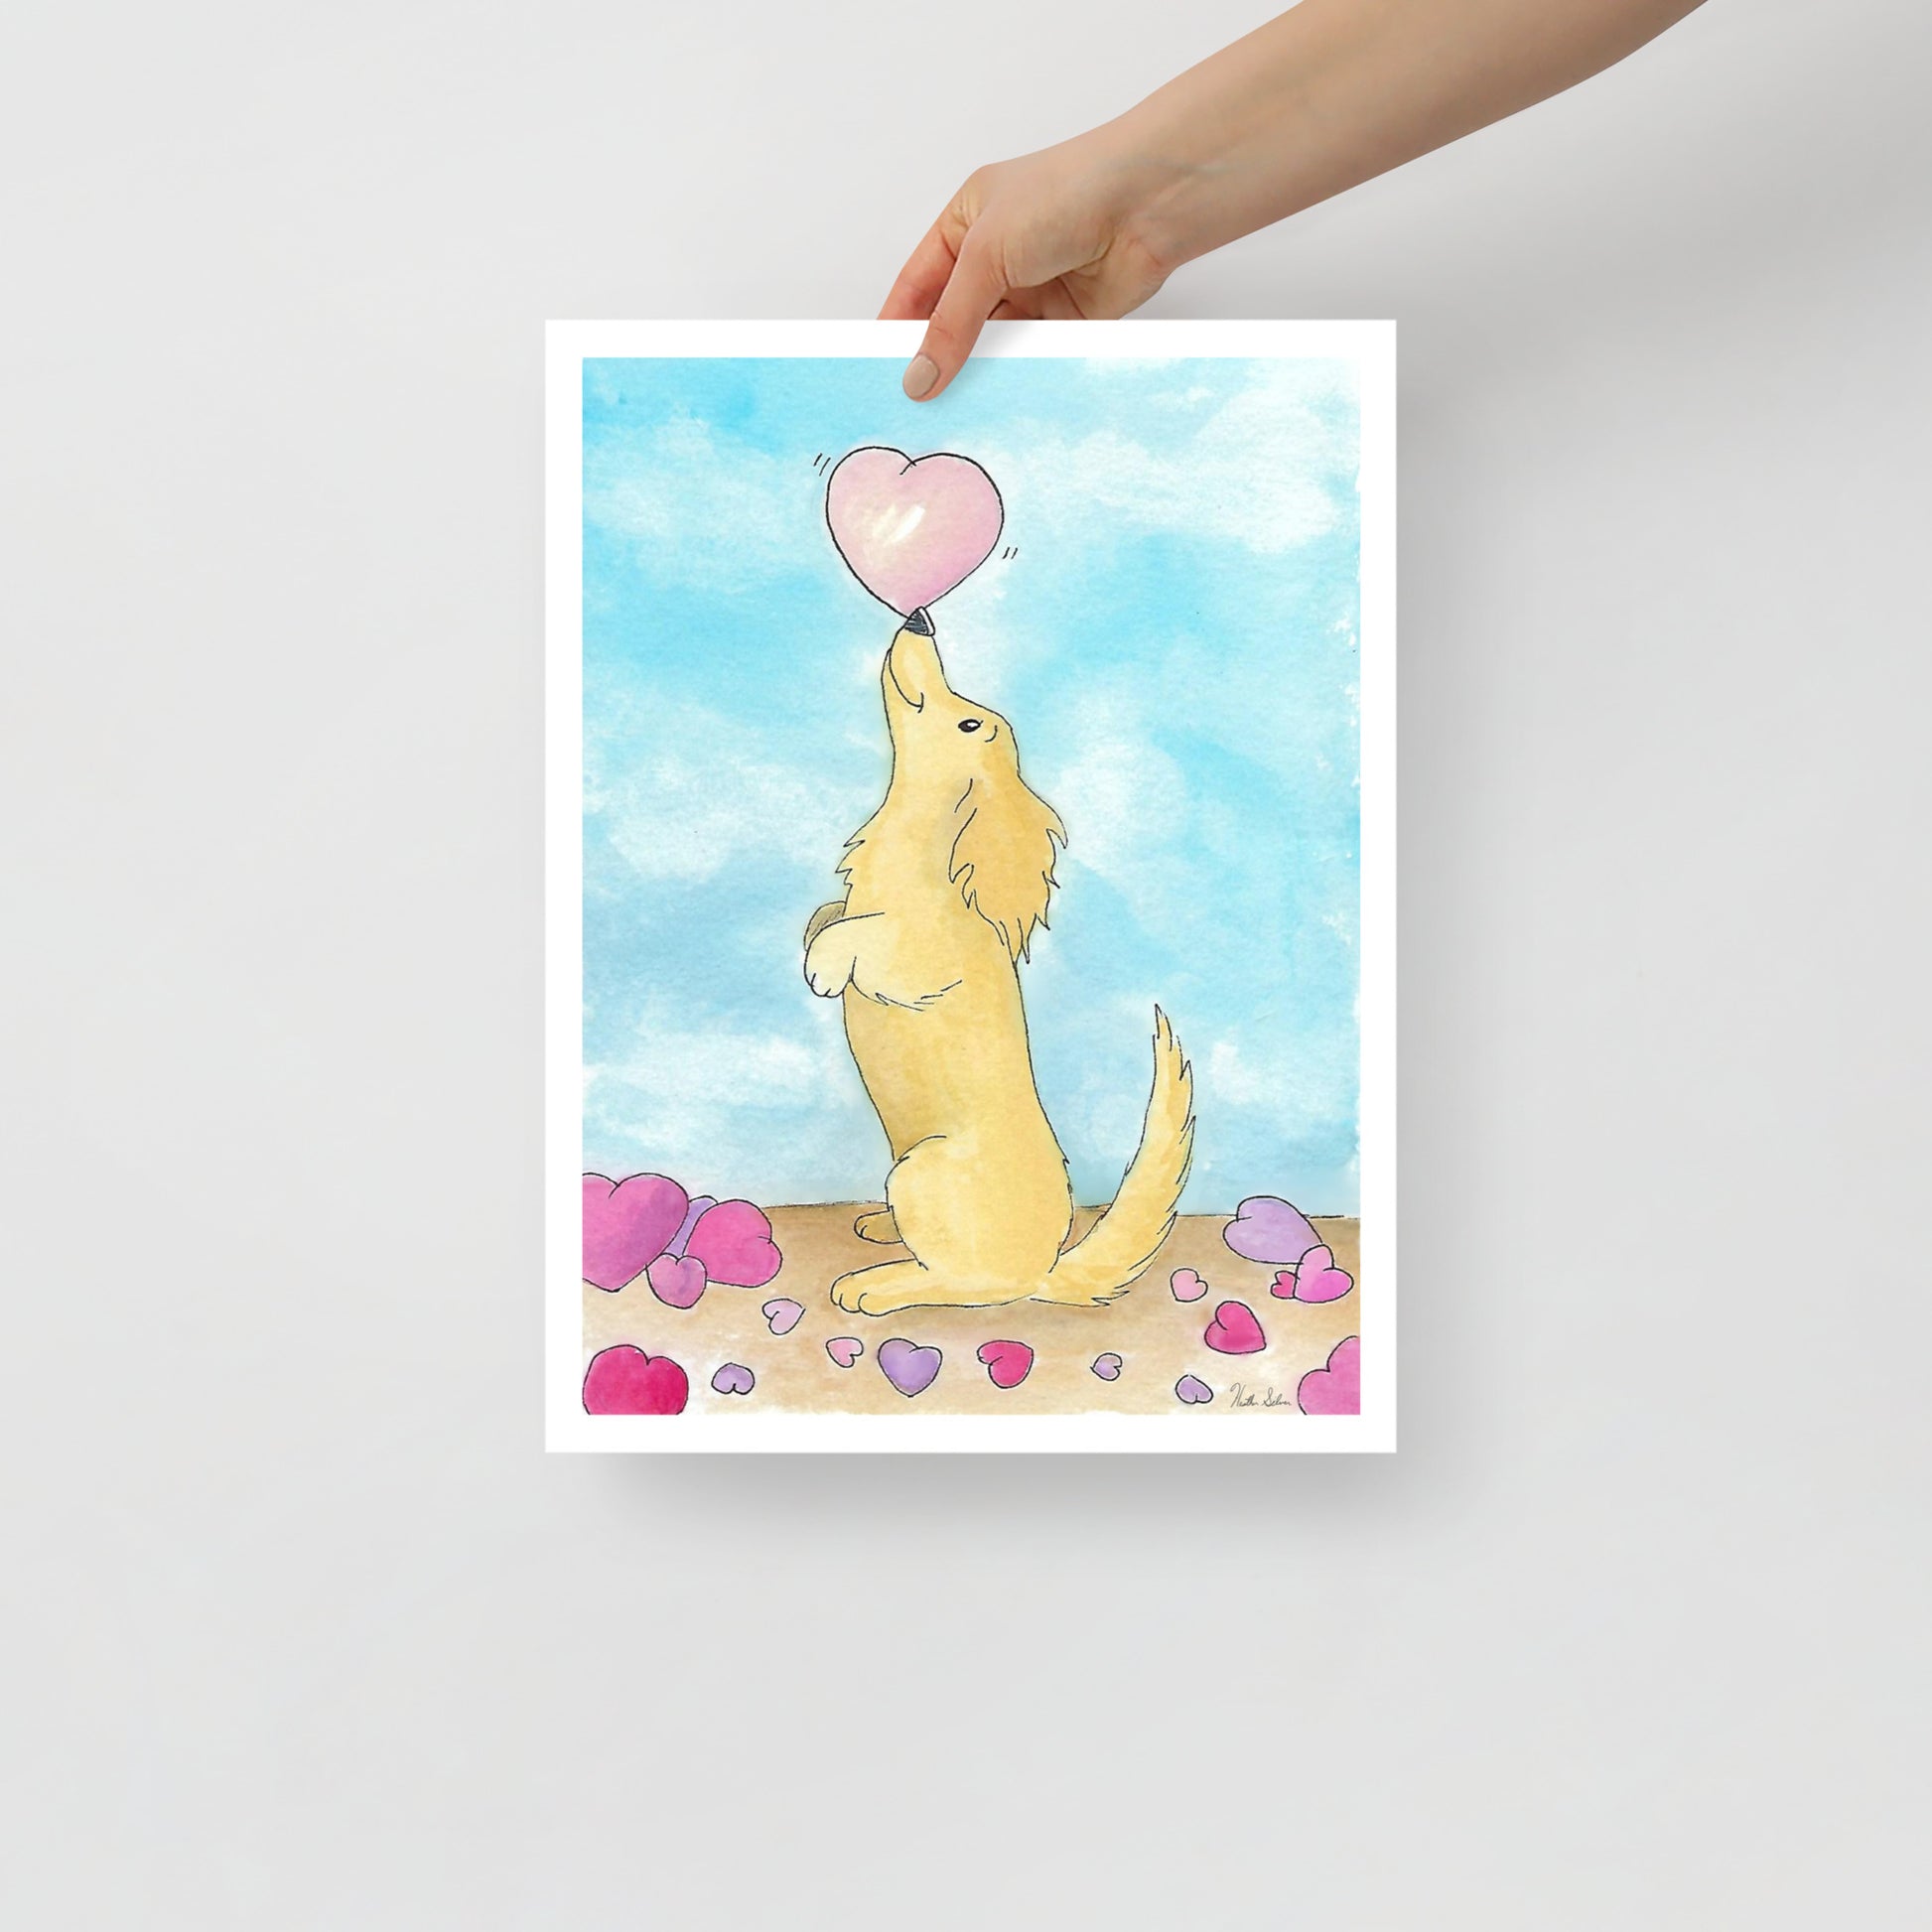 12 x 16 inch enhanced matte paper art print. Watercolor painting entitled Puppy love. Design shows a cute puppy balancing a heart on its nose, with hearts on the floor and a blue sky background. Shown being held by model's hand.